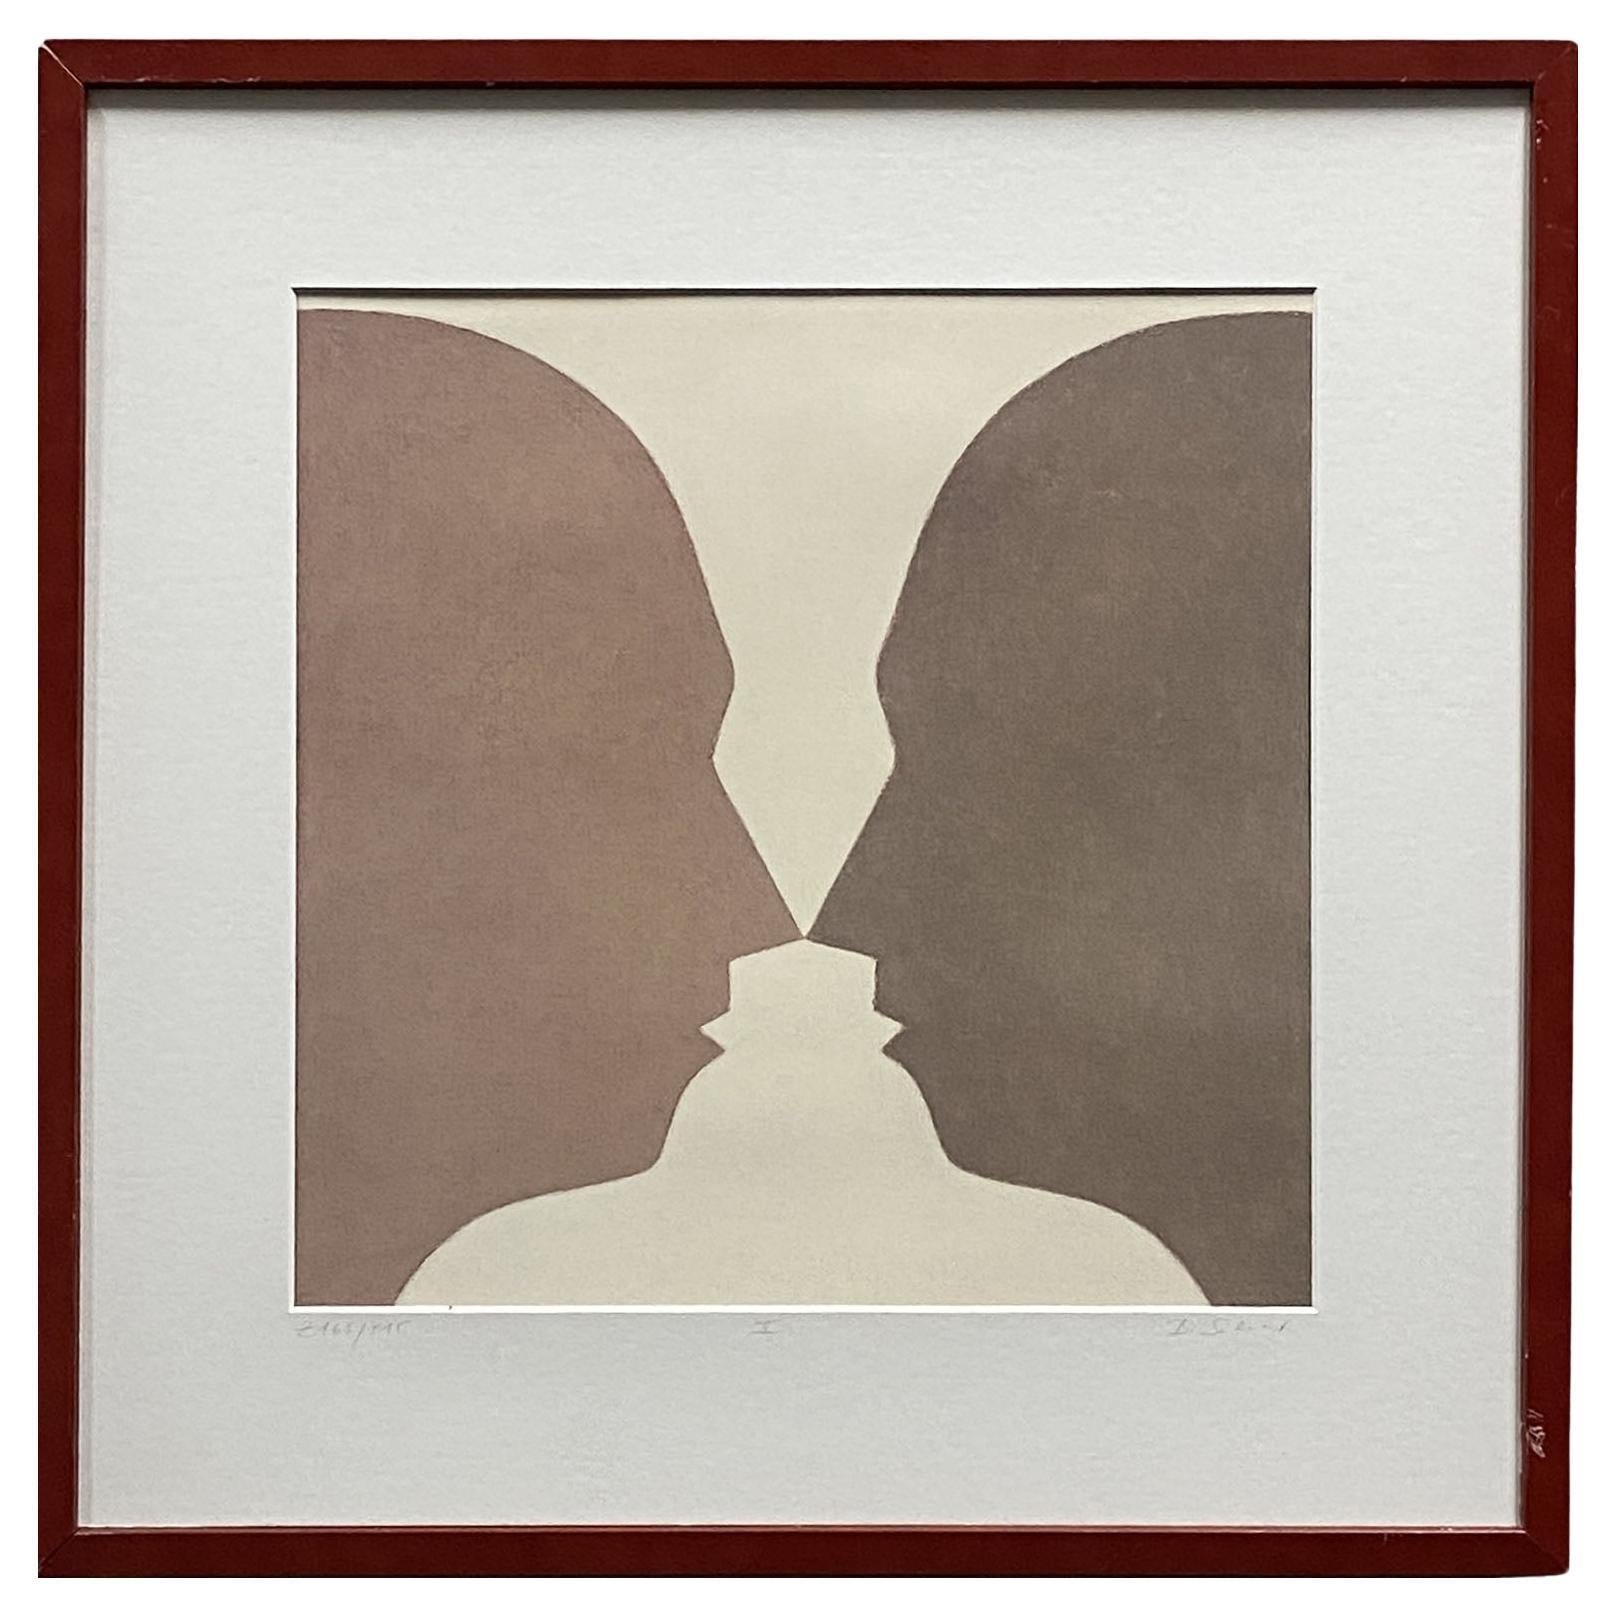 Lithograph of Two Silhouette Faces by Beate Selzer